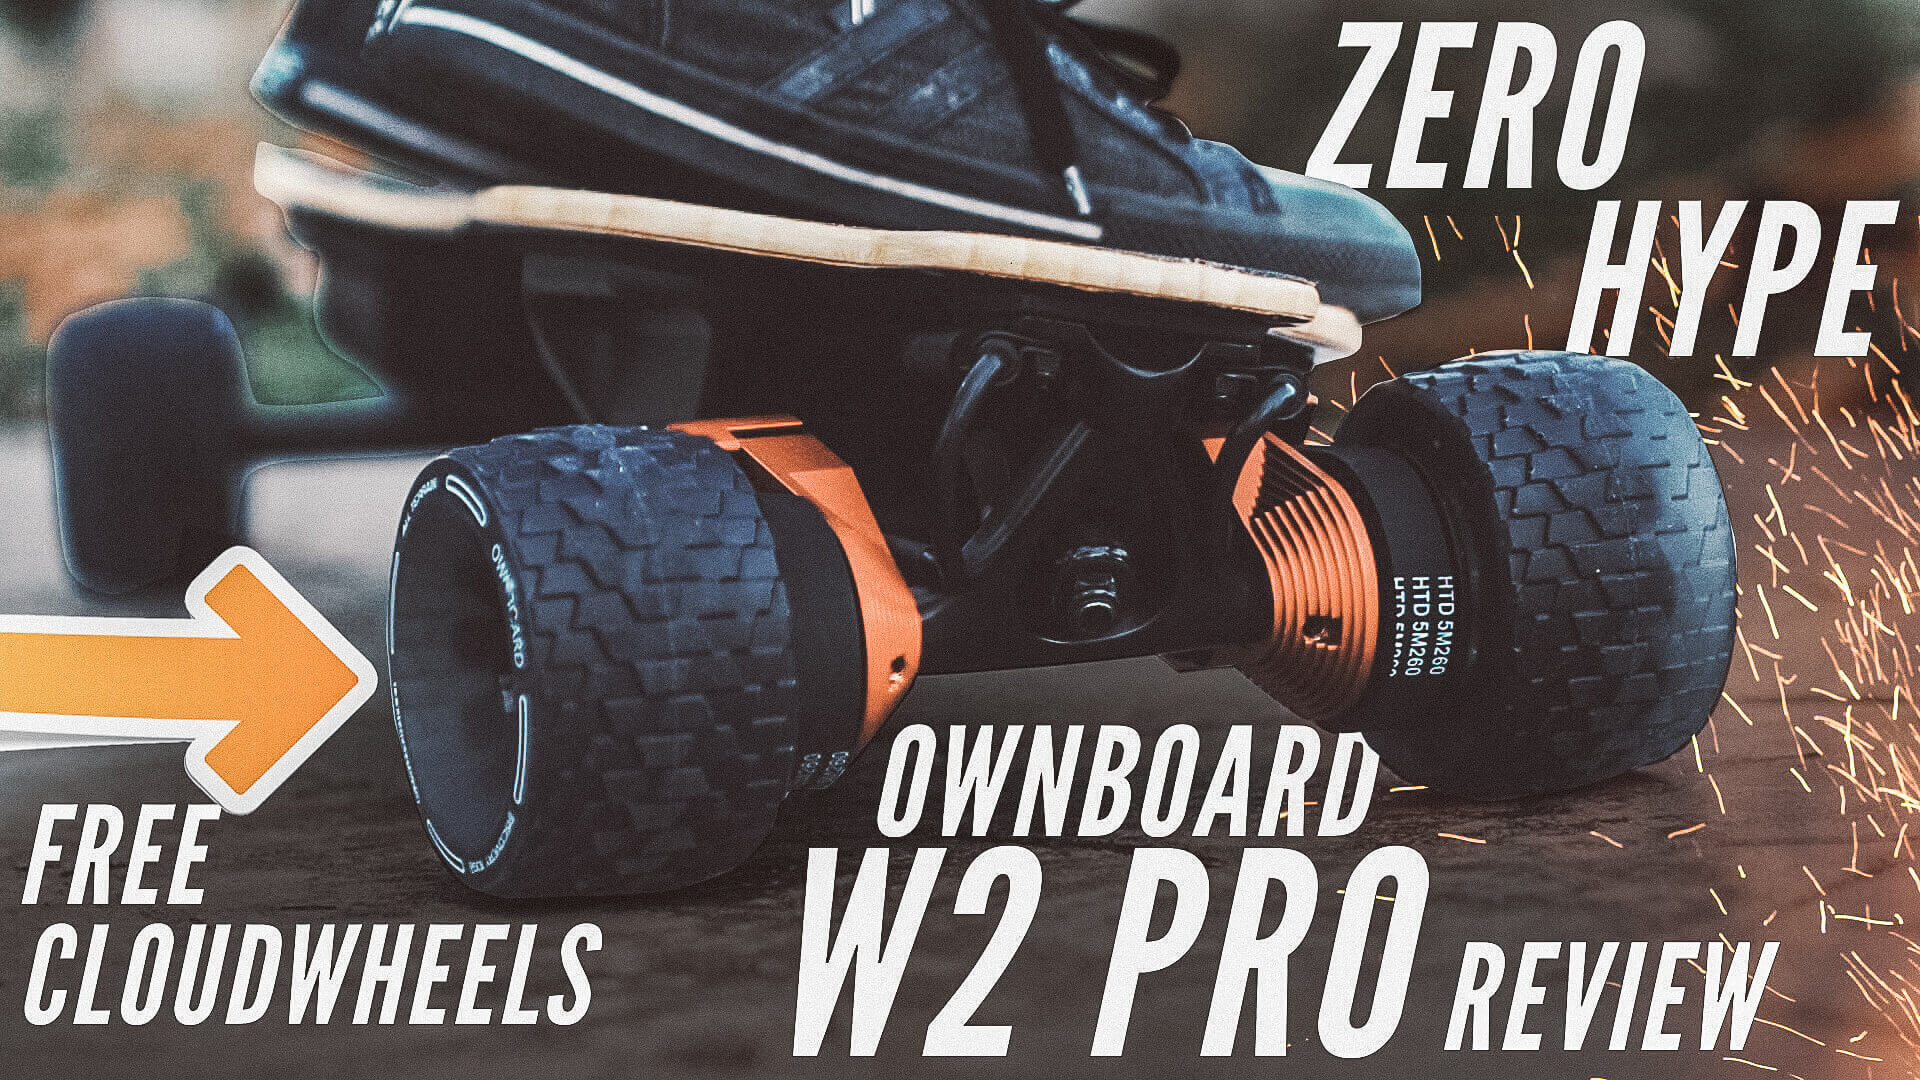 Ownboard W2 Pro Review – should it get some hype?